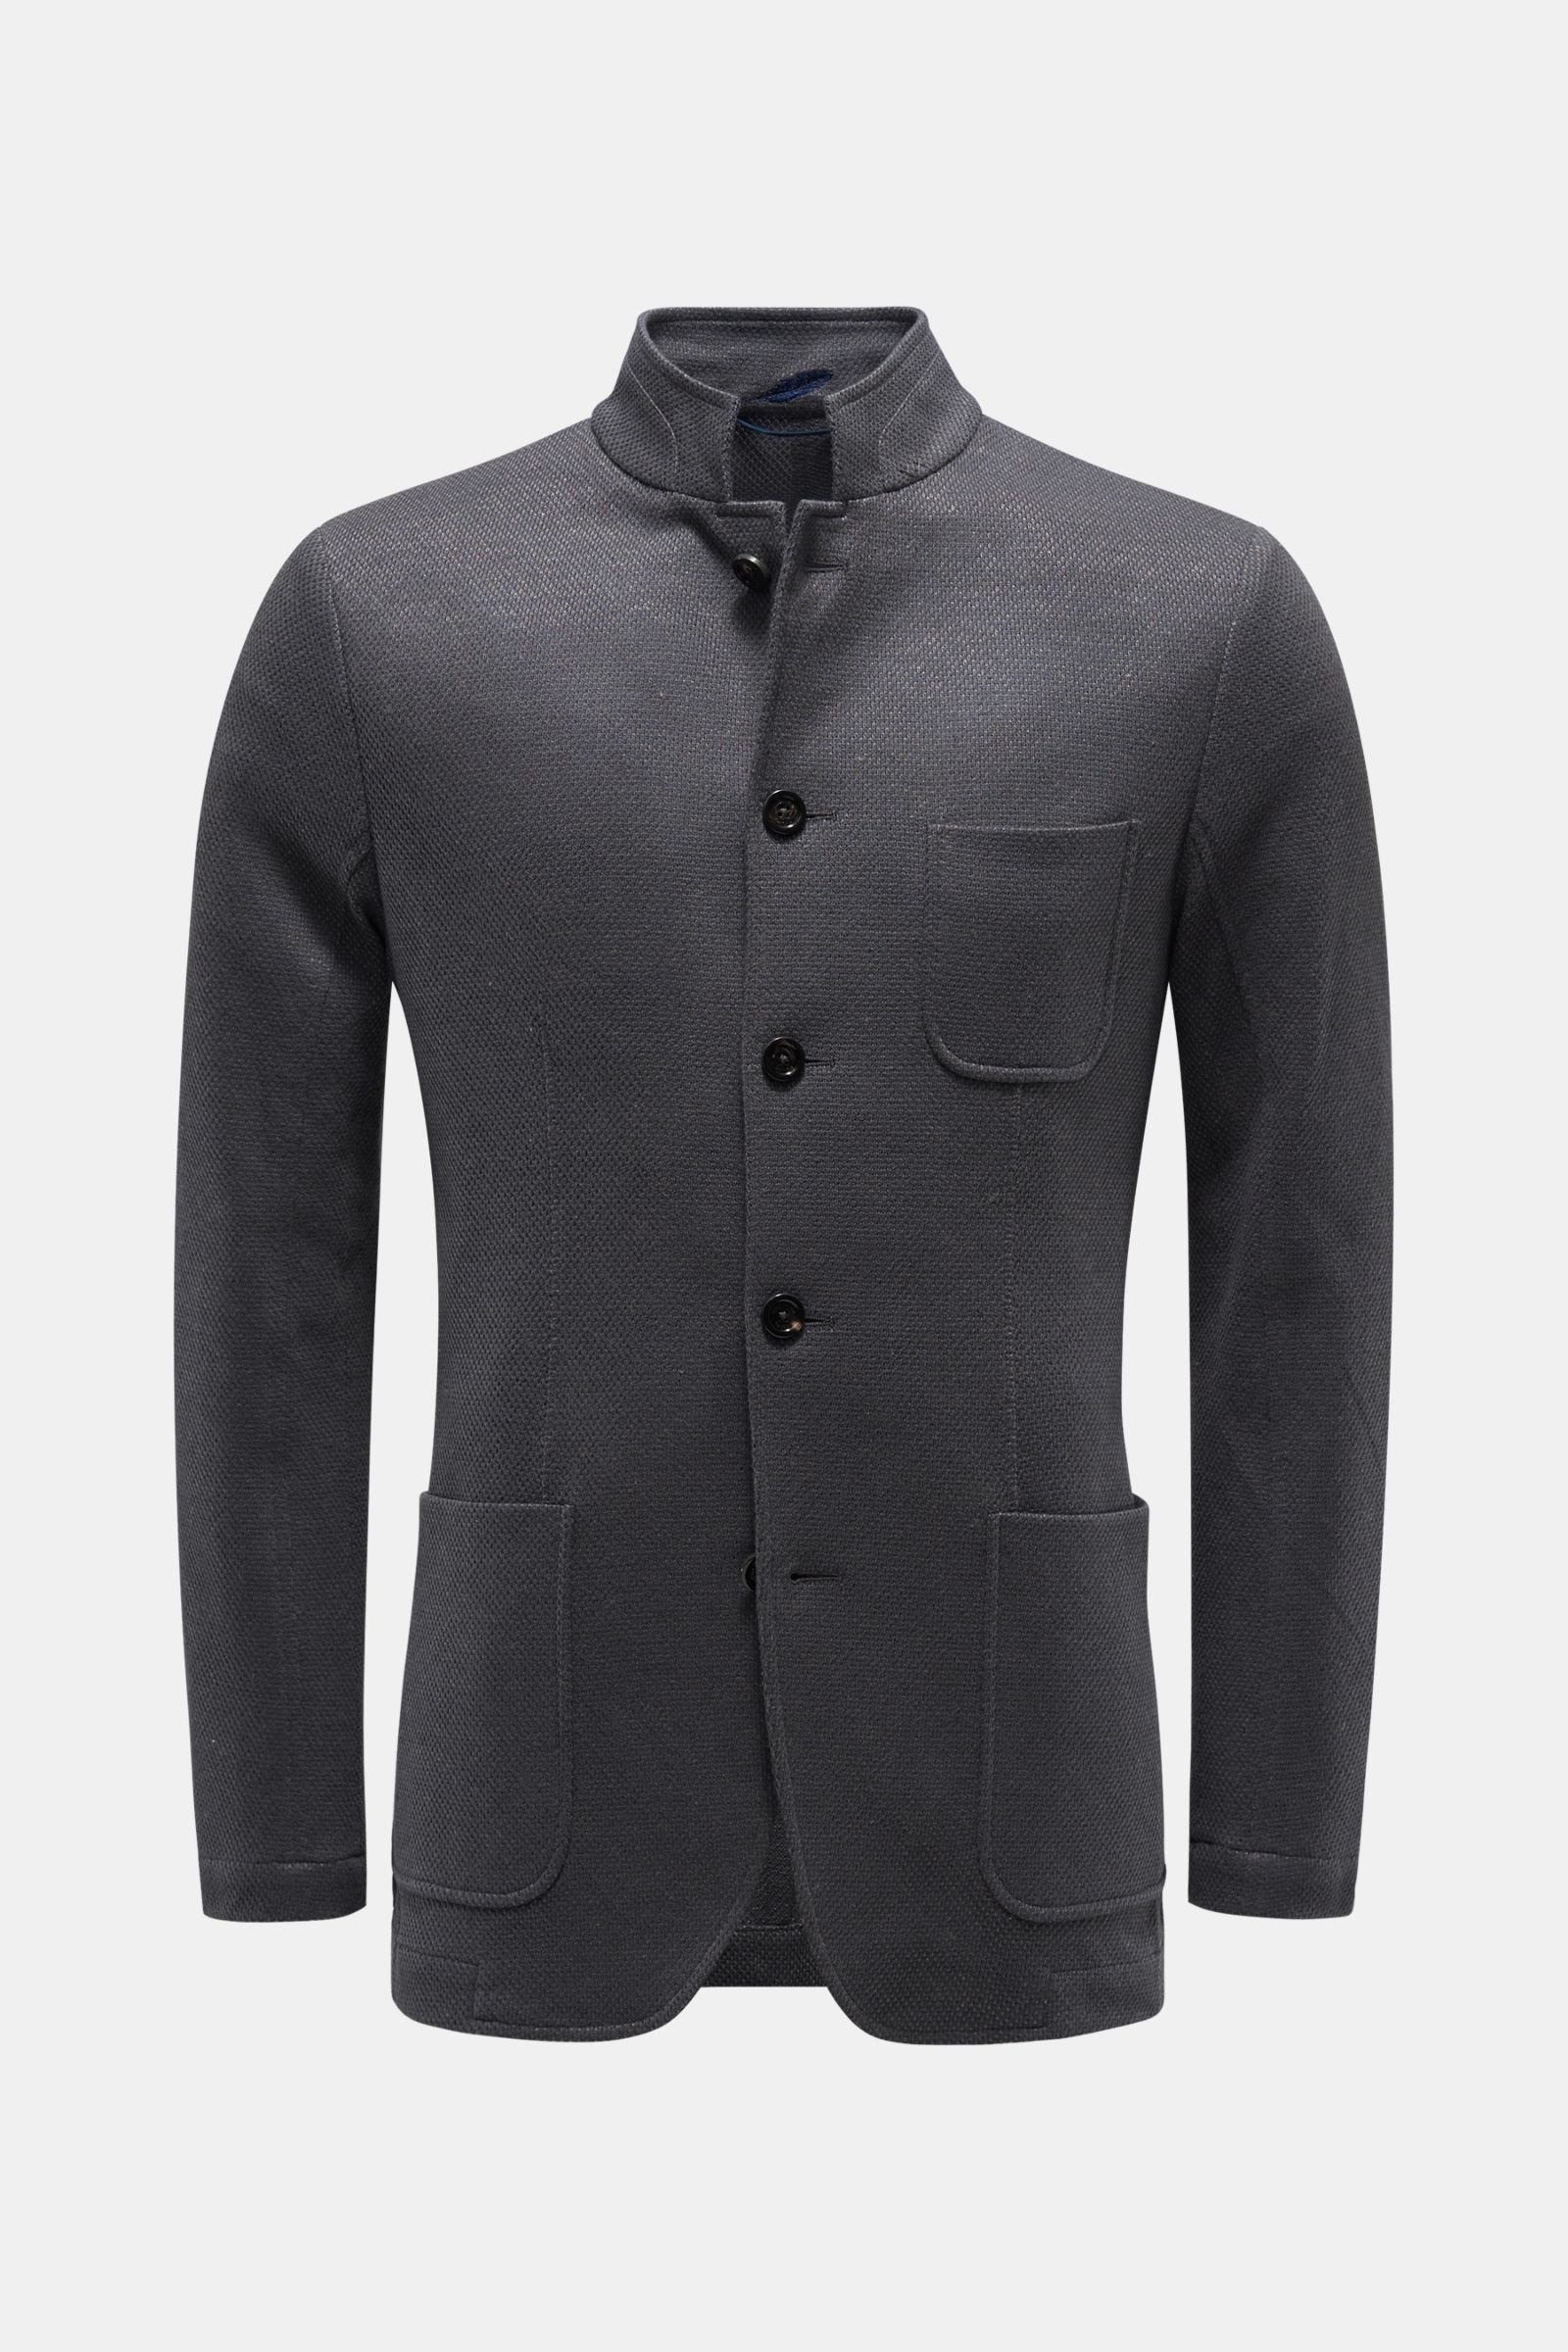 Smart-casual jacket anthracite